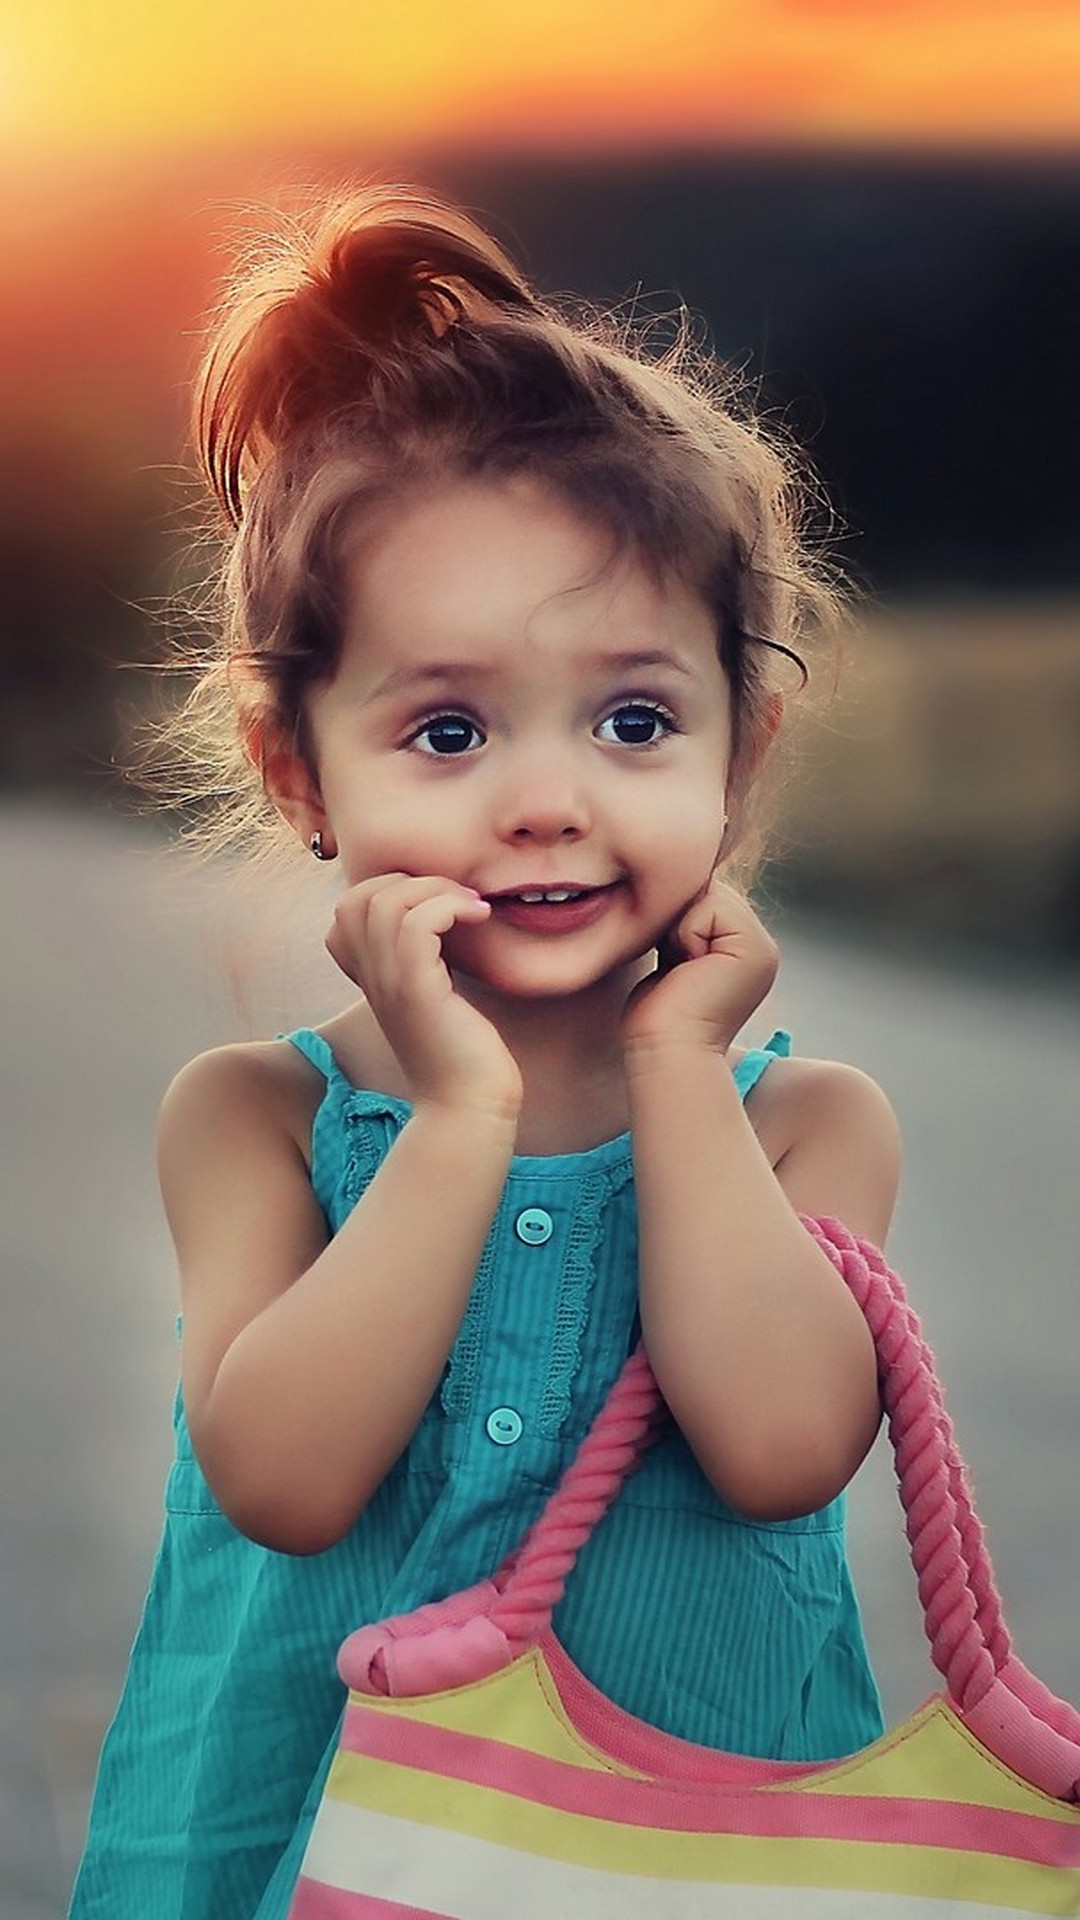 Iphone Wallpaper Hd Cute Girl Pic With High-resolution - Cute Girl Images  Hd - 1080x1920 Wallpaper 